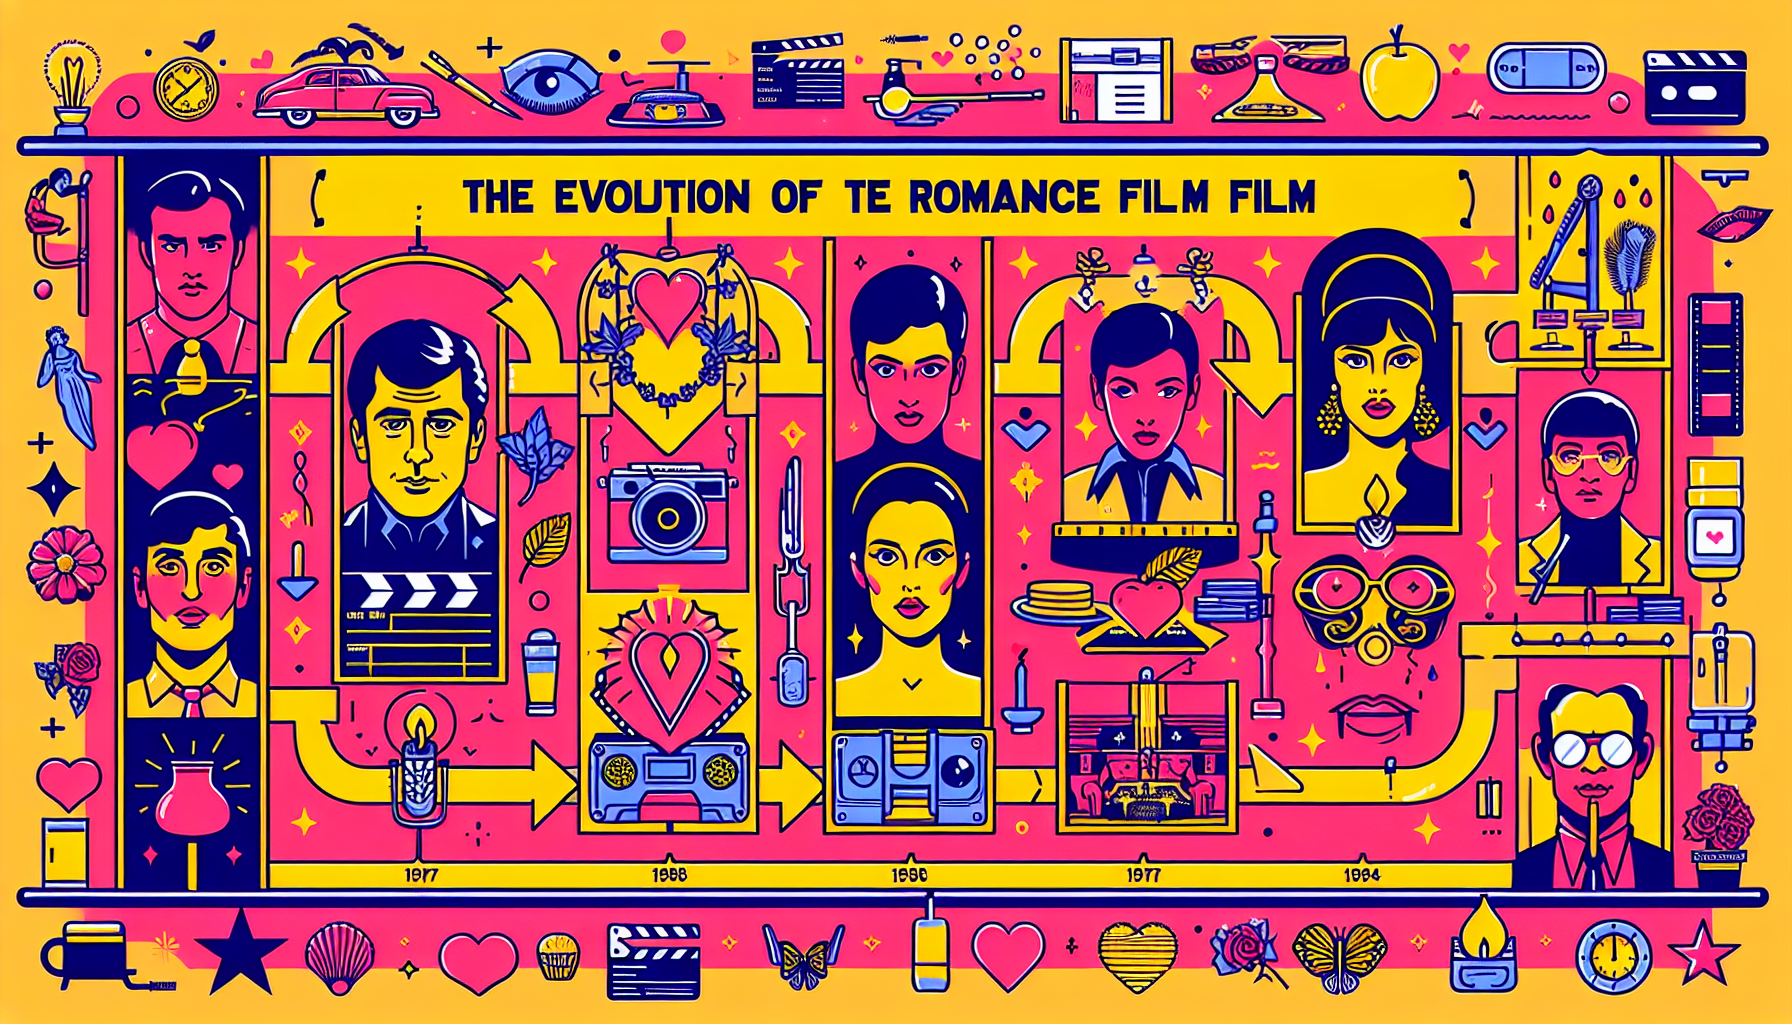 Create a visually engaging representation of the evolution of the romance film genre. The image should depict iconic elements, symbols, and motifs commonly found in romance films, arranged in a timeline format. It should start from the classic approach, subtly hinting at elements inspired by Ephron-like directing, and evolve towards more contemporary methods with nods to styles reminiscent of Linklater. The overall design should be vibrant and modern, with no text or written content involved.